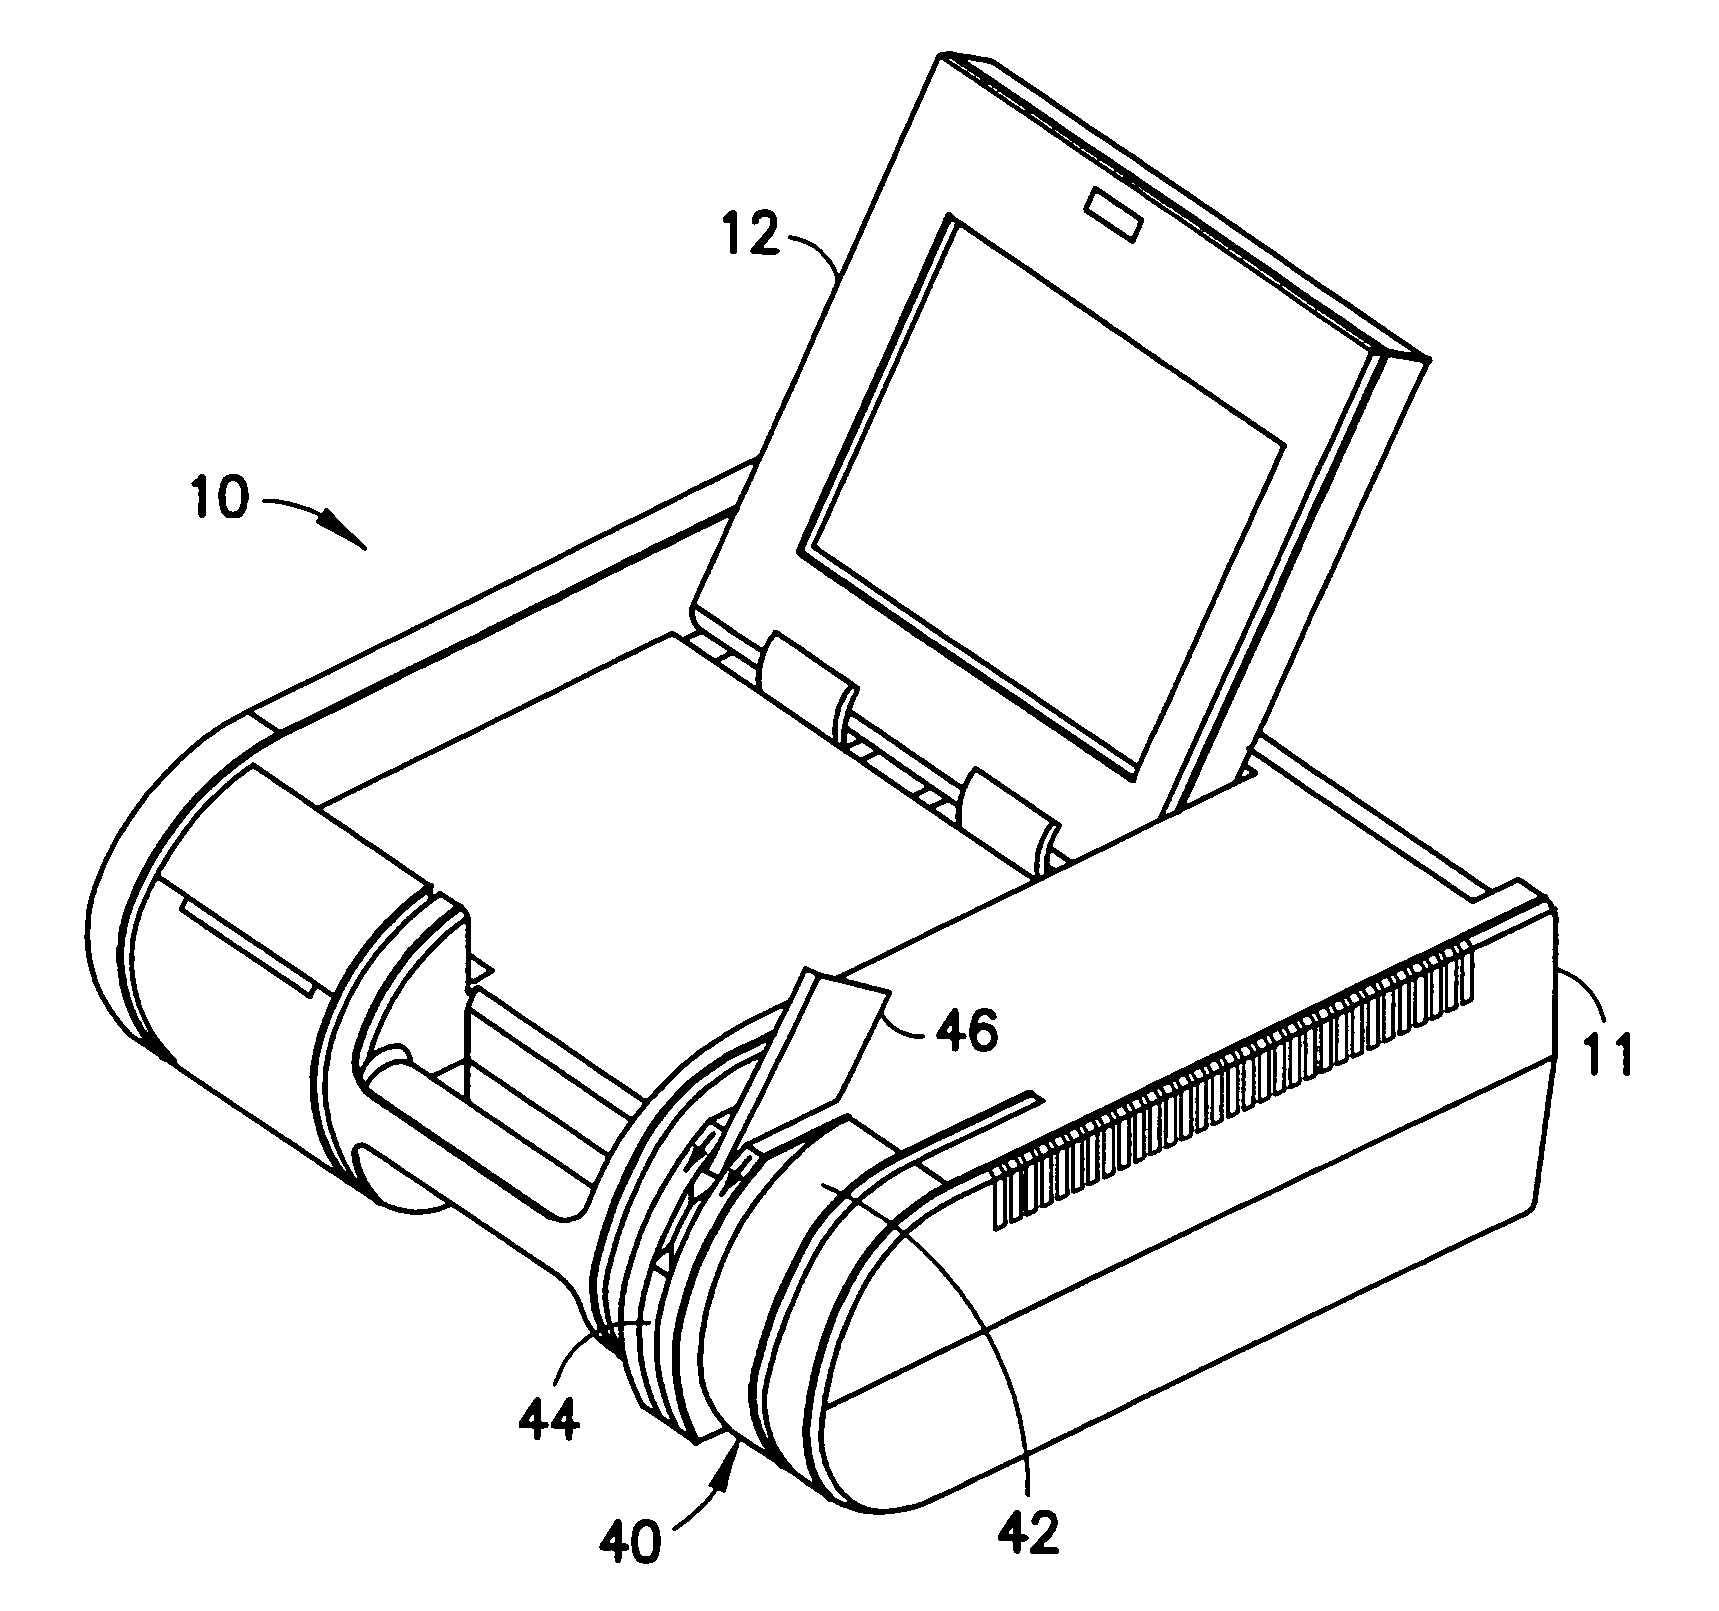 Device for testing surfaces of articles for traces of explosives and/or drugs